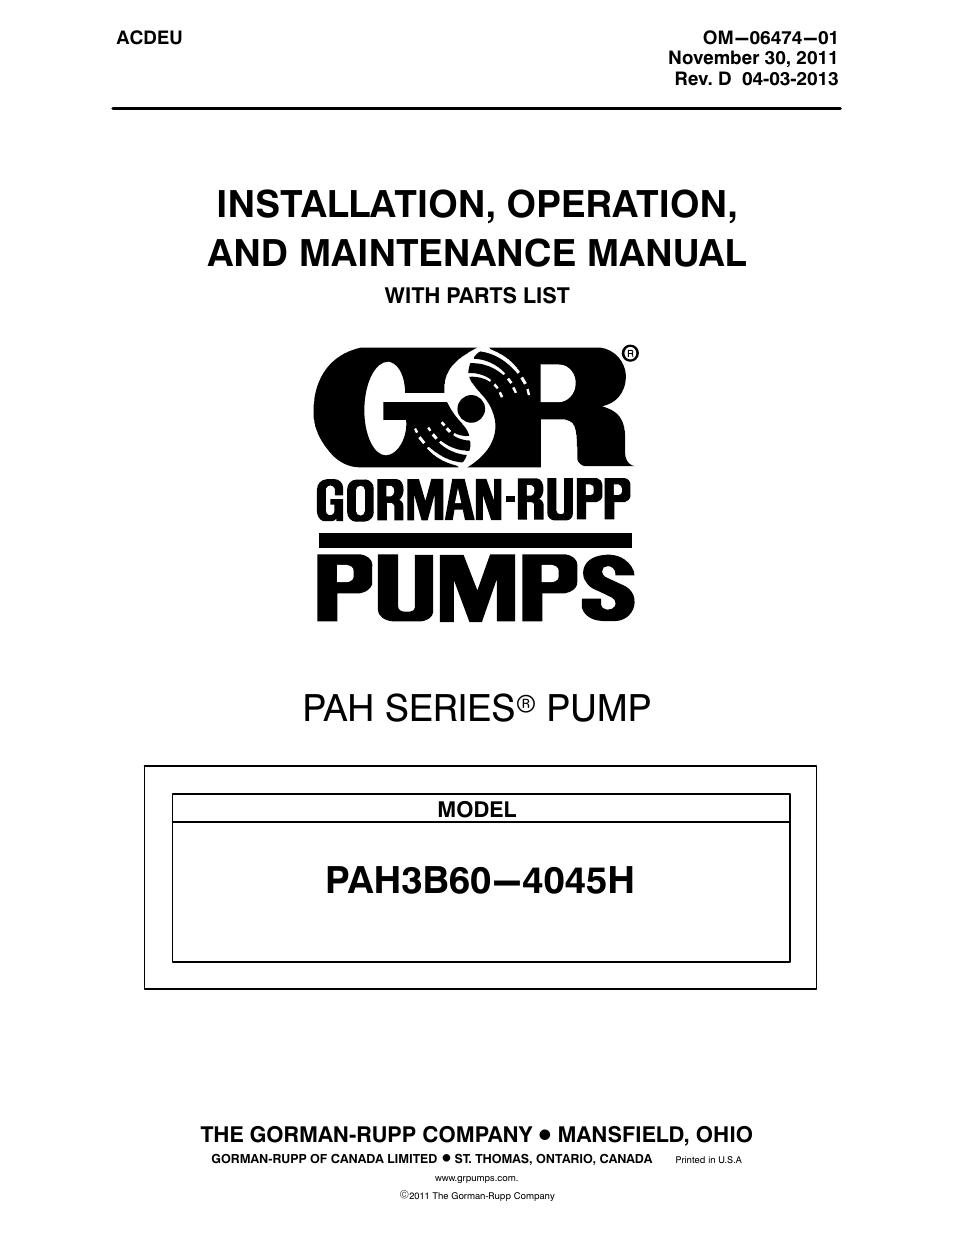 Gorman-Rupp Pumps PAH3B60-4045H 1493144 and up User Manual | 49 pages